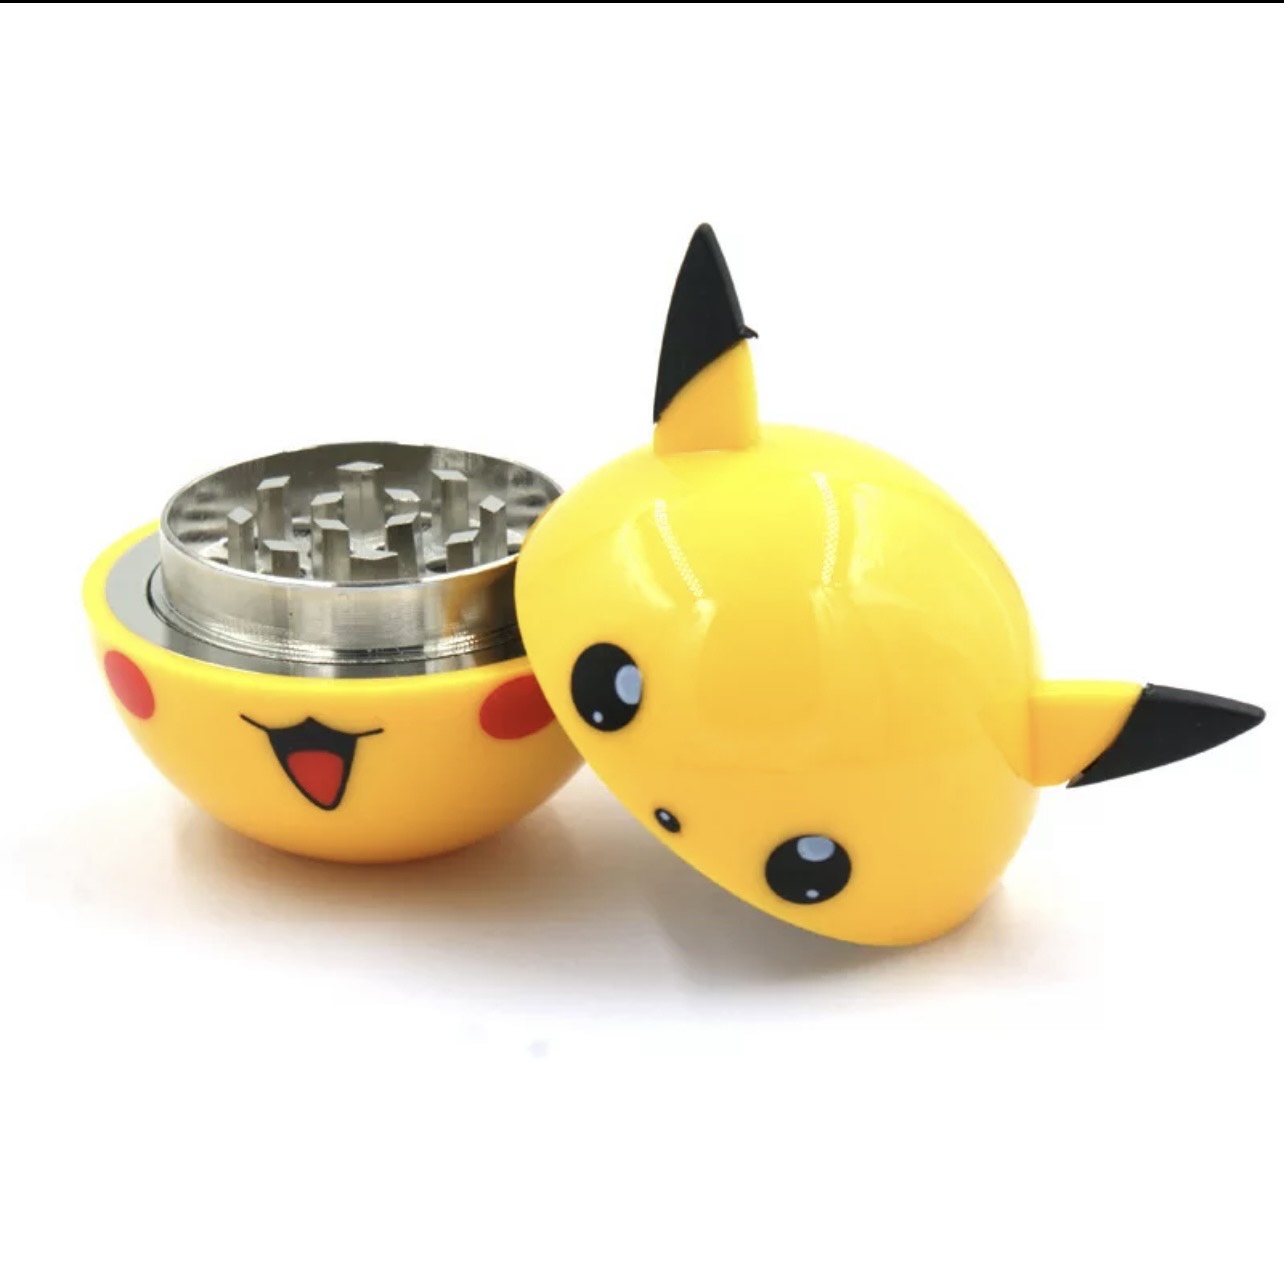 Pika Pokeball Grinder For Herbs and Spices - Pika gift catchem kitchen. Crusher